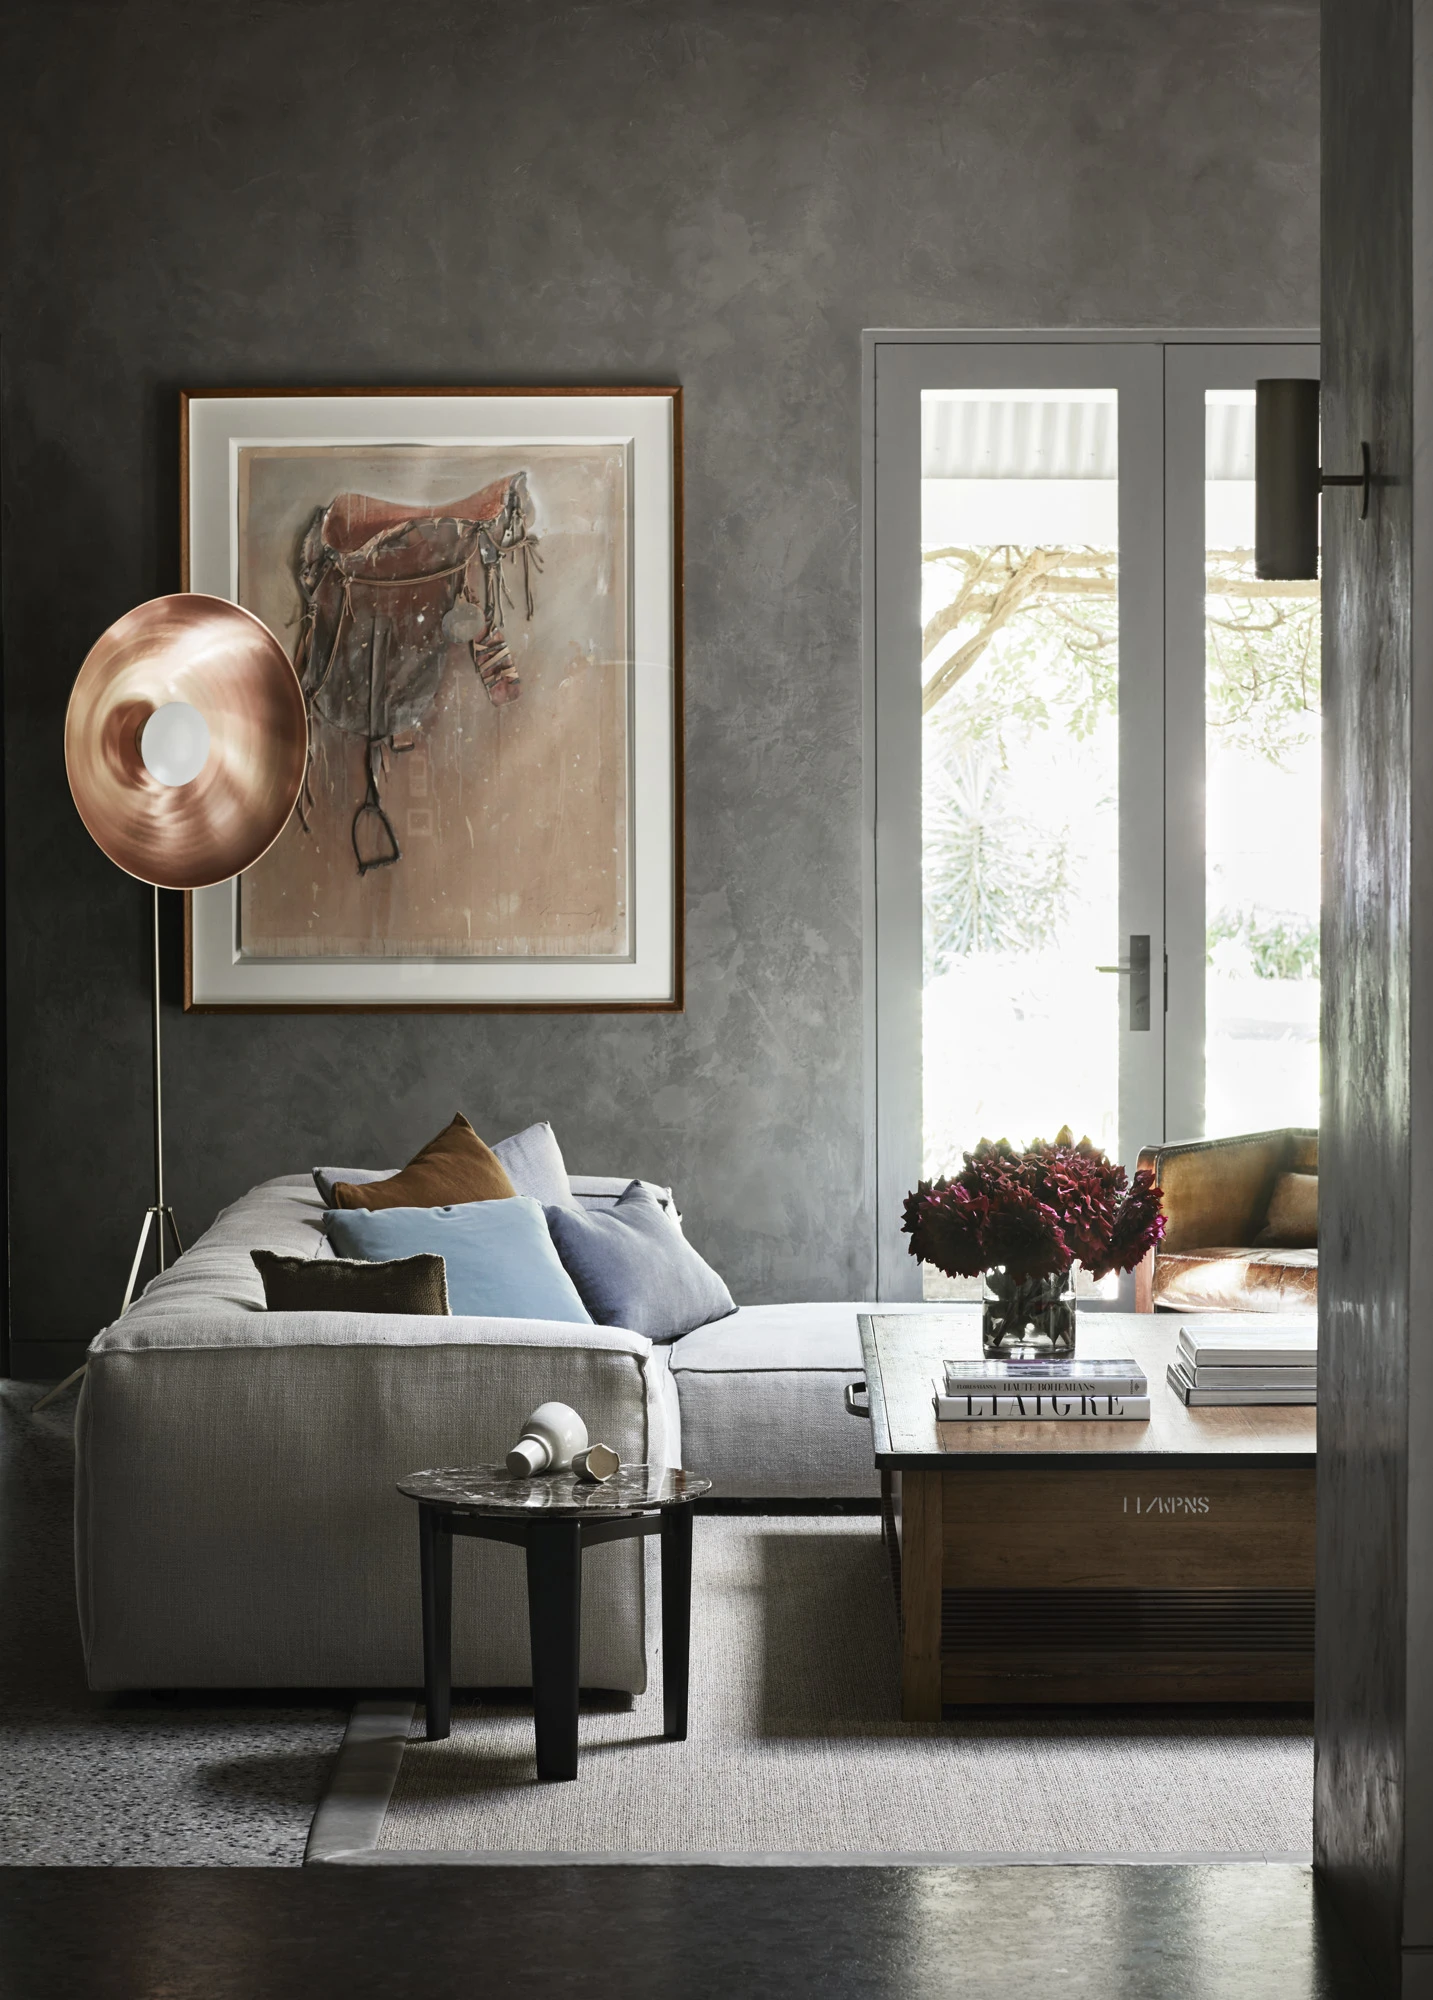 Grey living room with grey couch, copper lamp, artwork and white french doors.